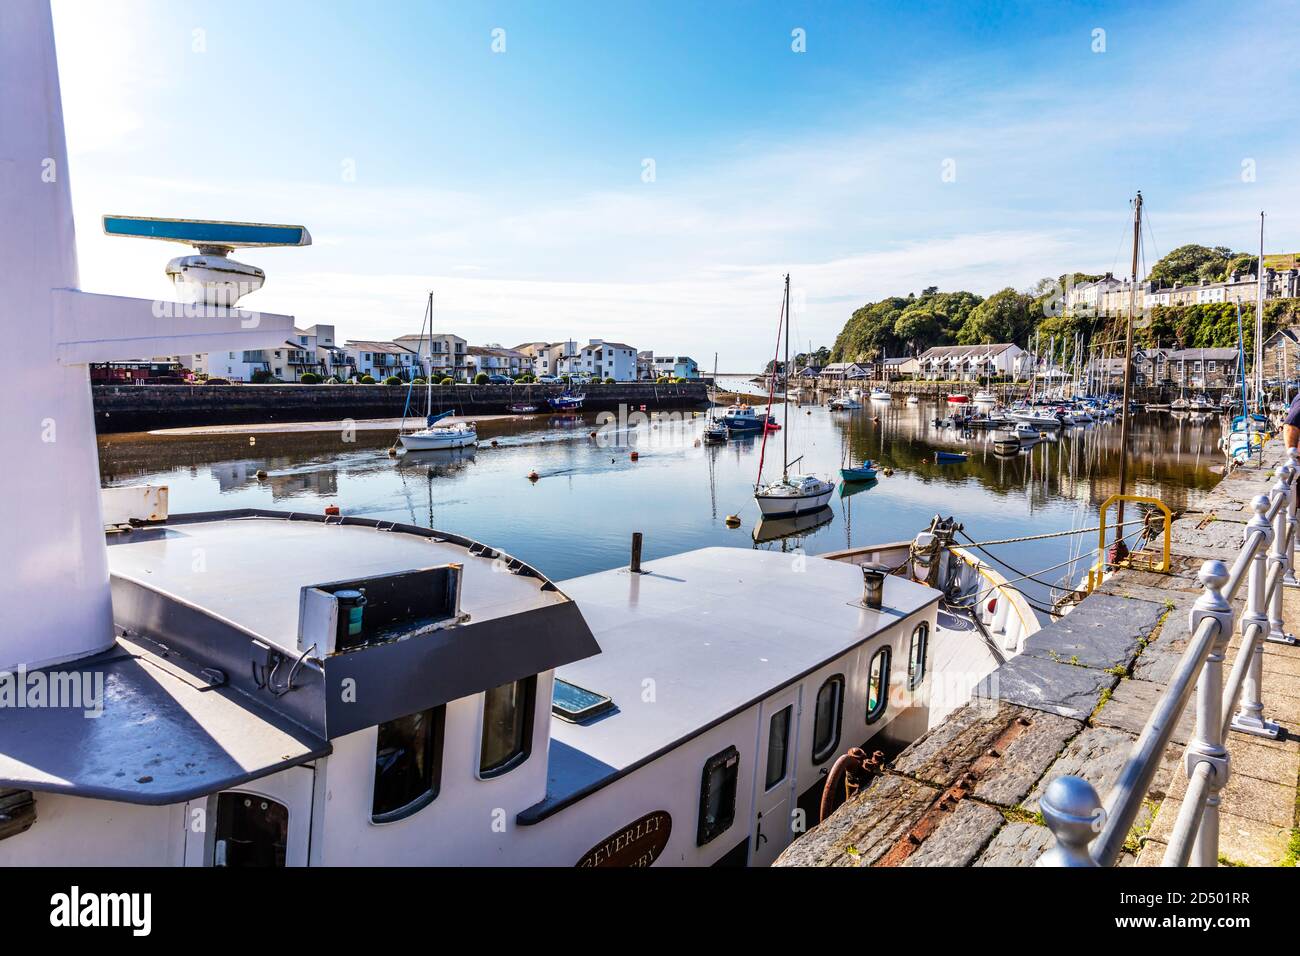 Porthmadog, Wales, UK, slate walled harbour, Porthmadog harbour, Porthmadog harbor, Porthmadog Wales, boats, yachts, Stryd Fawr, pen-y-cei and greaves Stock Photo